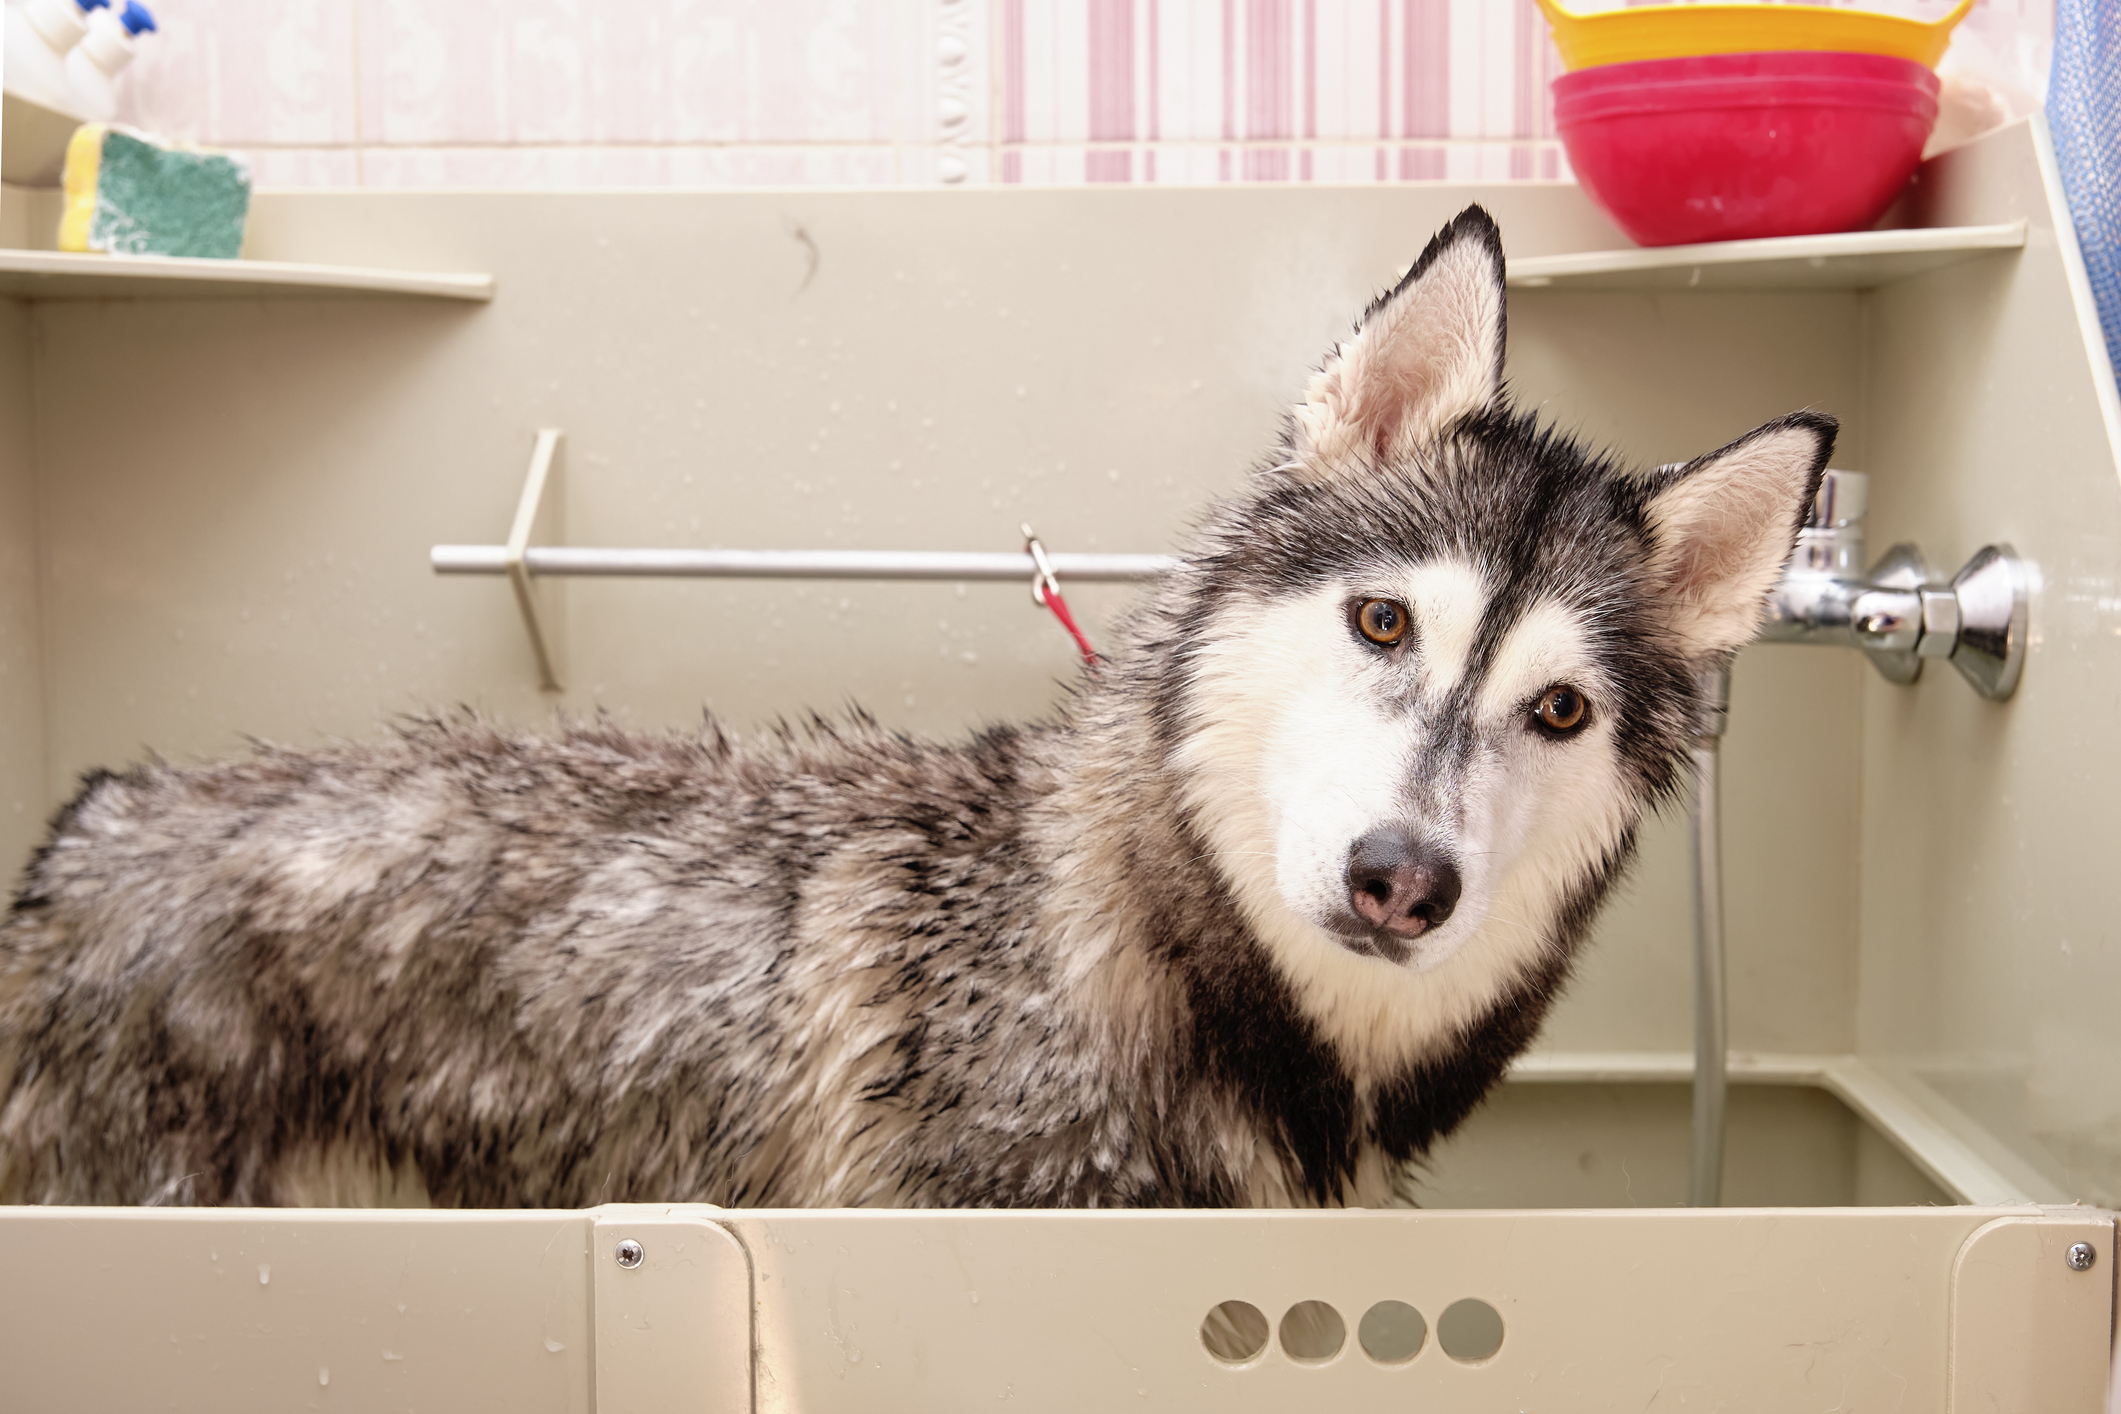 Internet not prepared for how rescue husky was treated at groomers